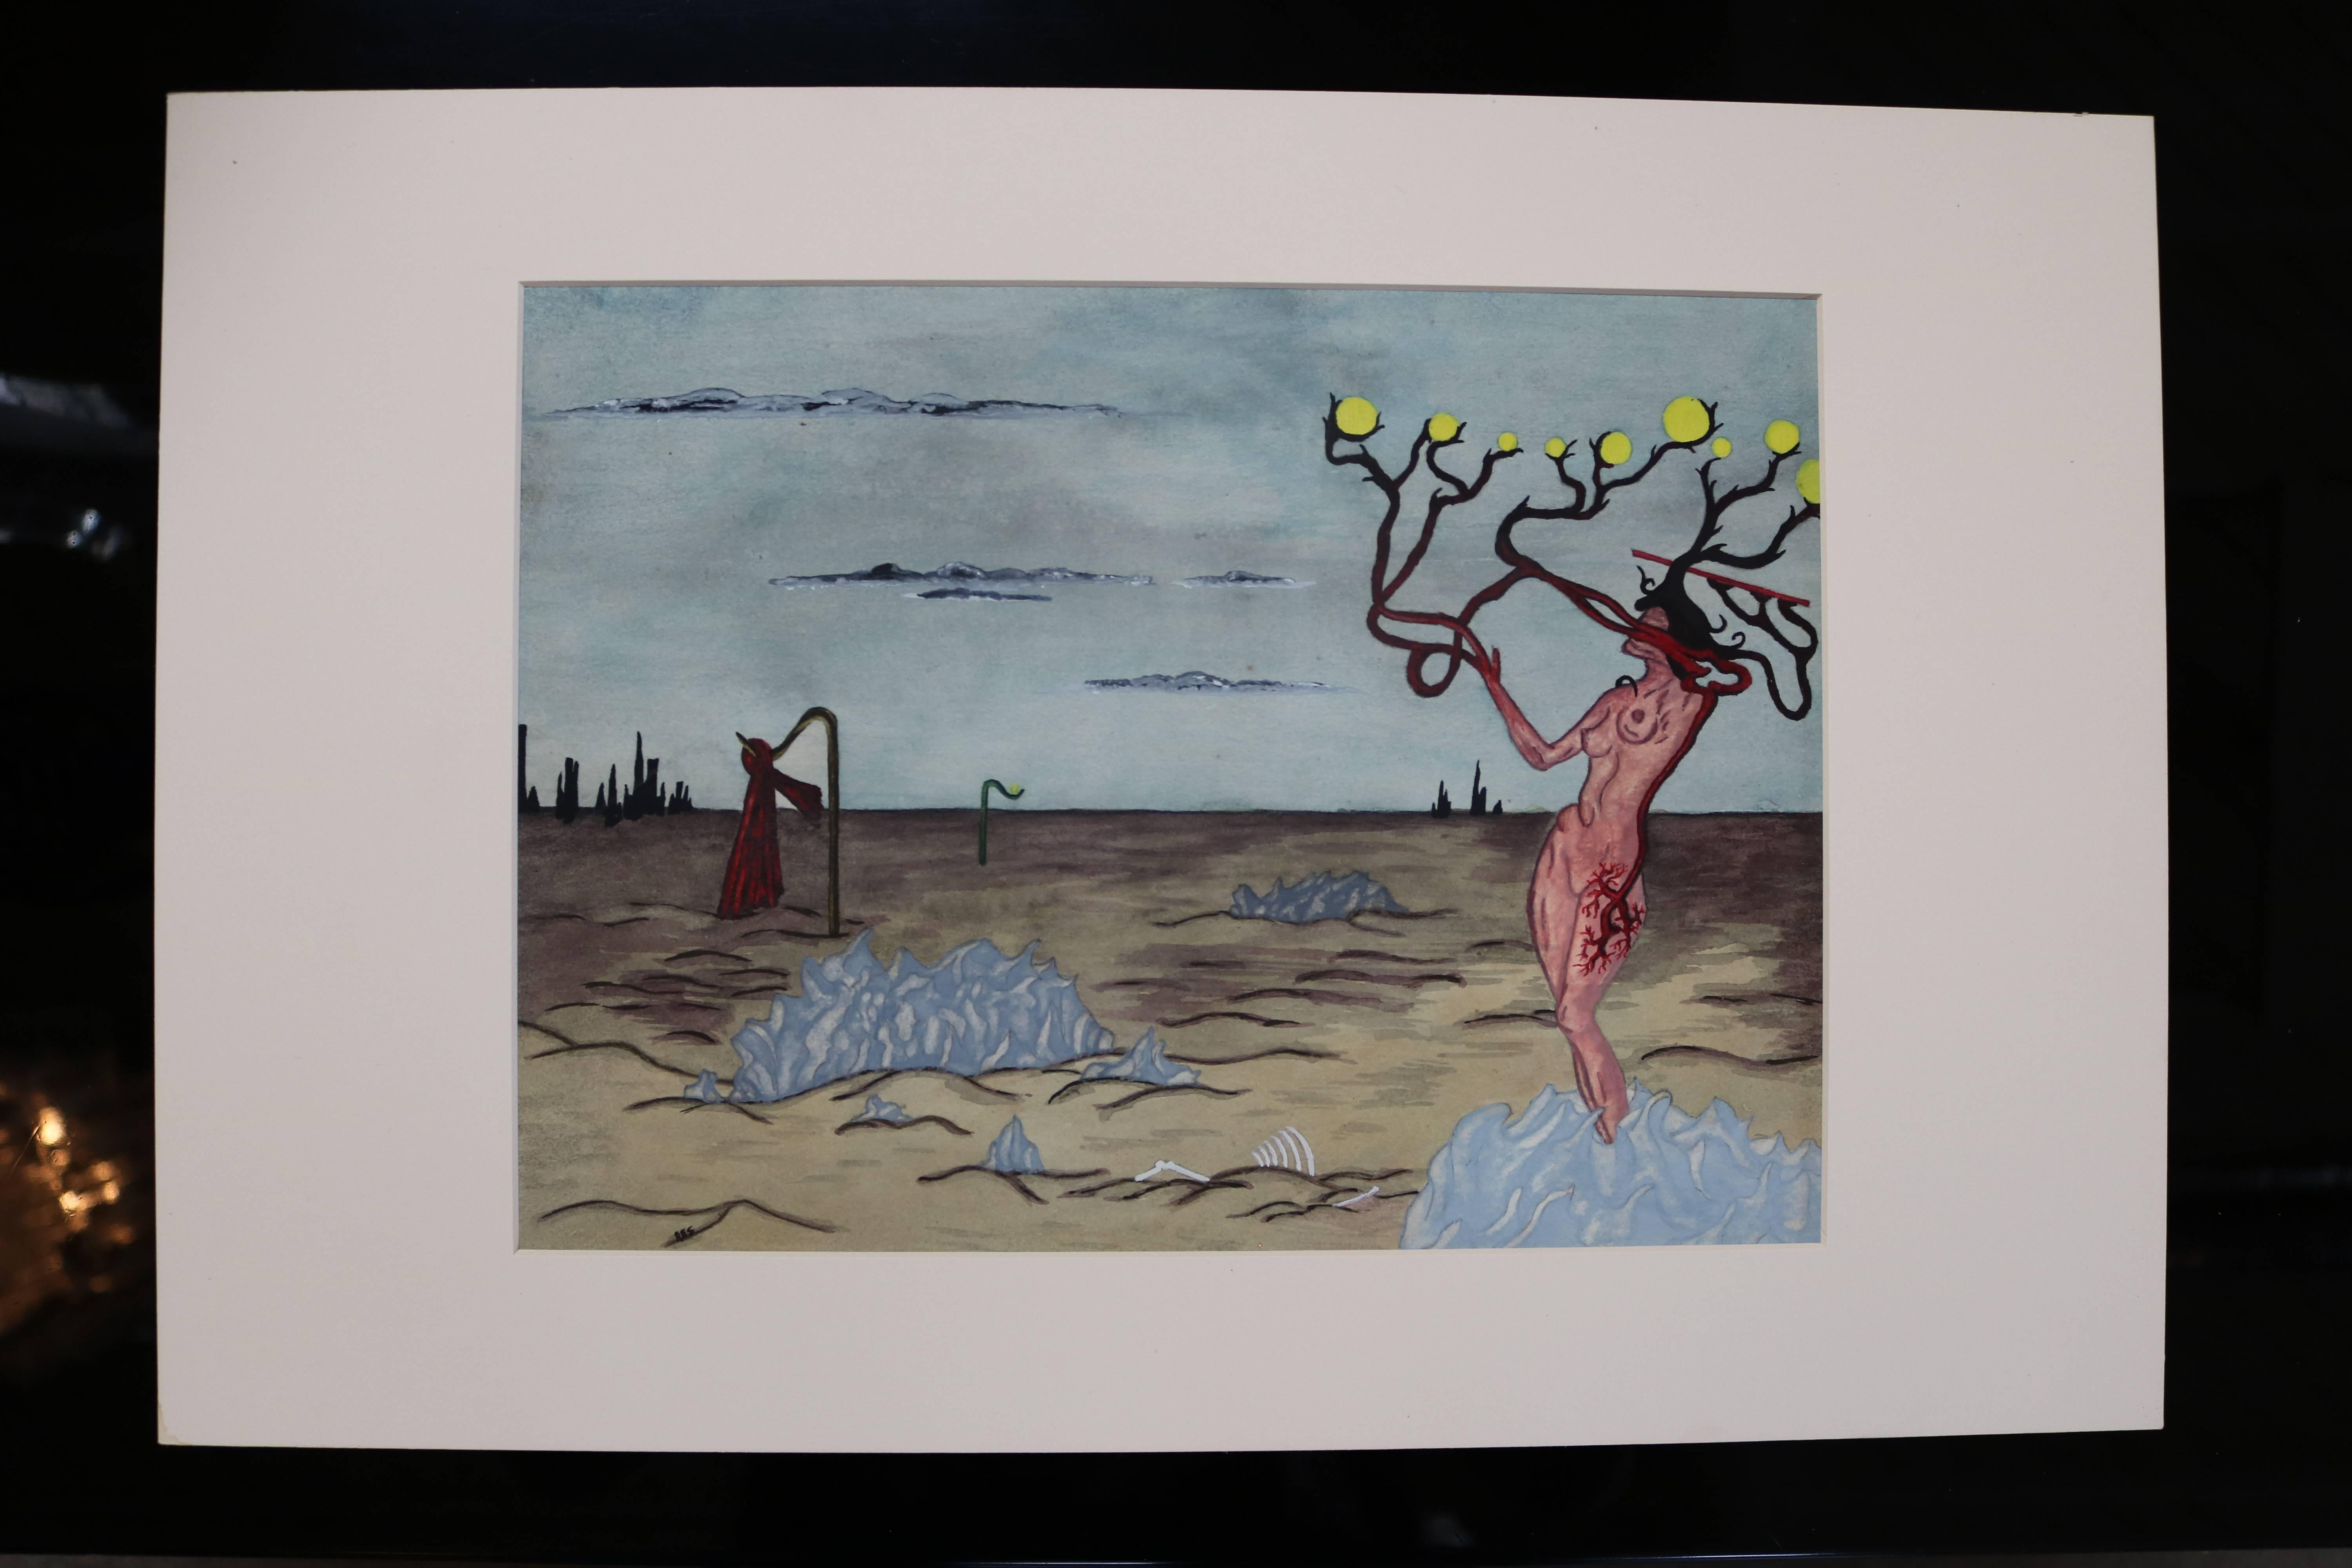 Framed watercolor of a desert landscape with a woman tree and clouds, by artist R. E. Schwelke.